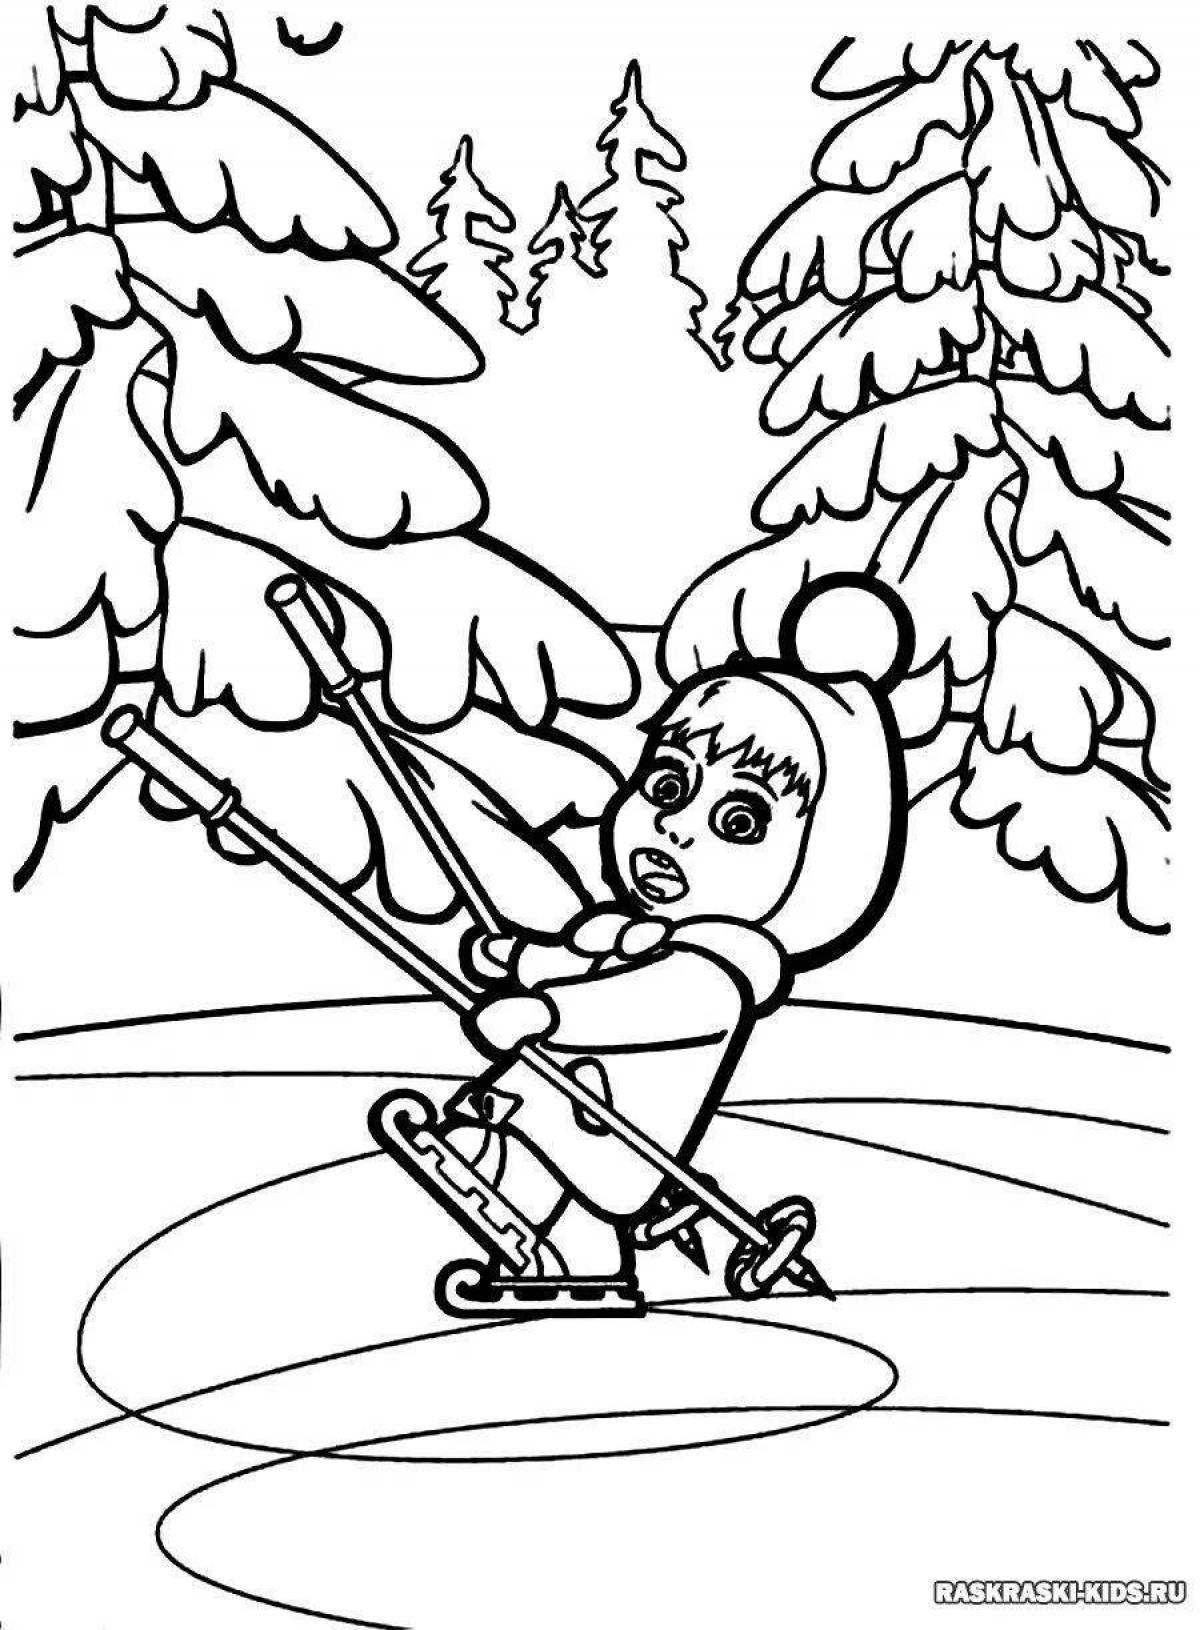 Incredible safe ice coloring page